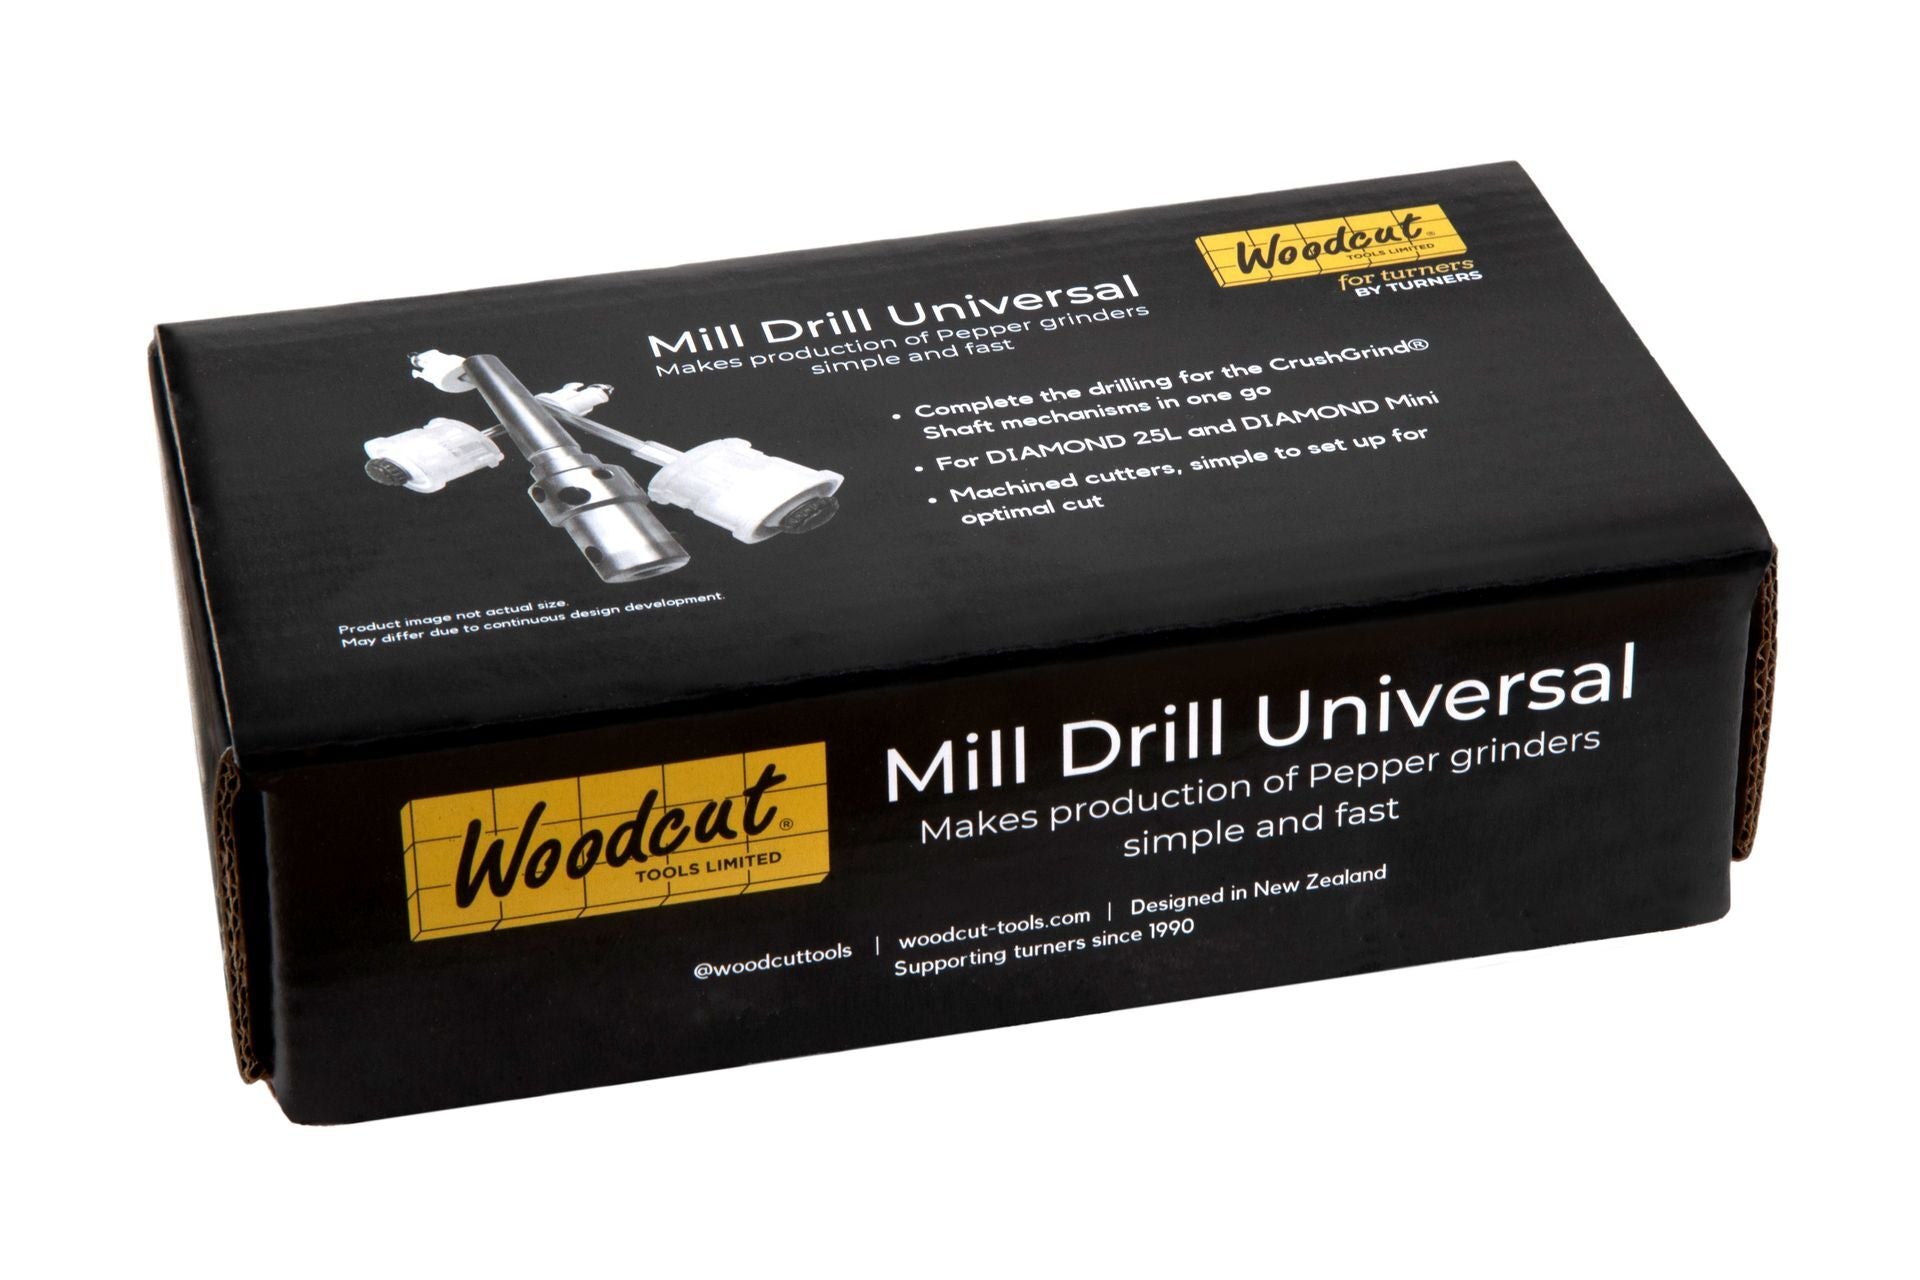 Mill Drill Universal MDU by Woodcut Tools